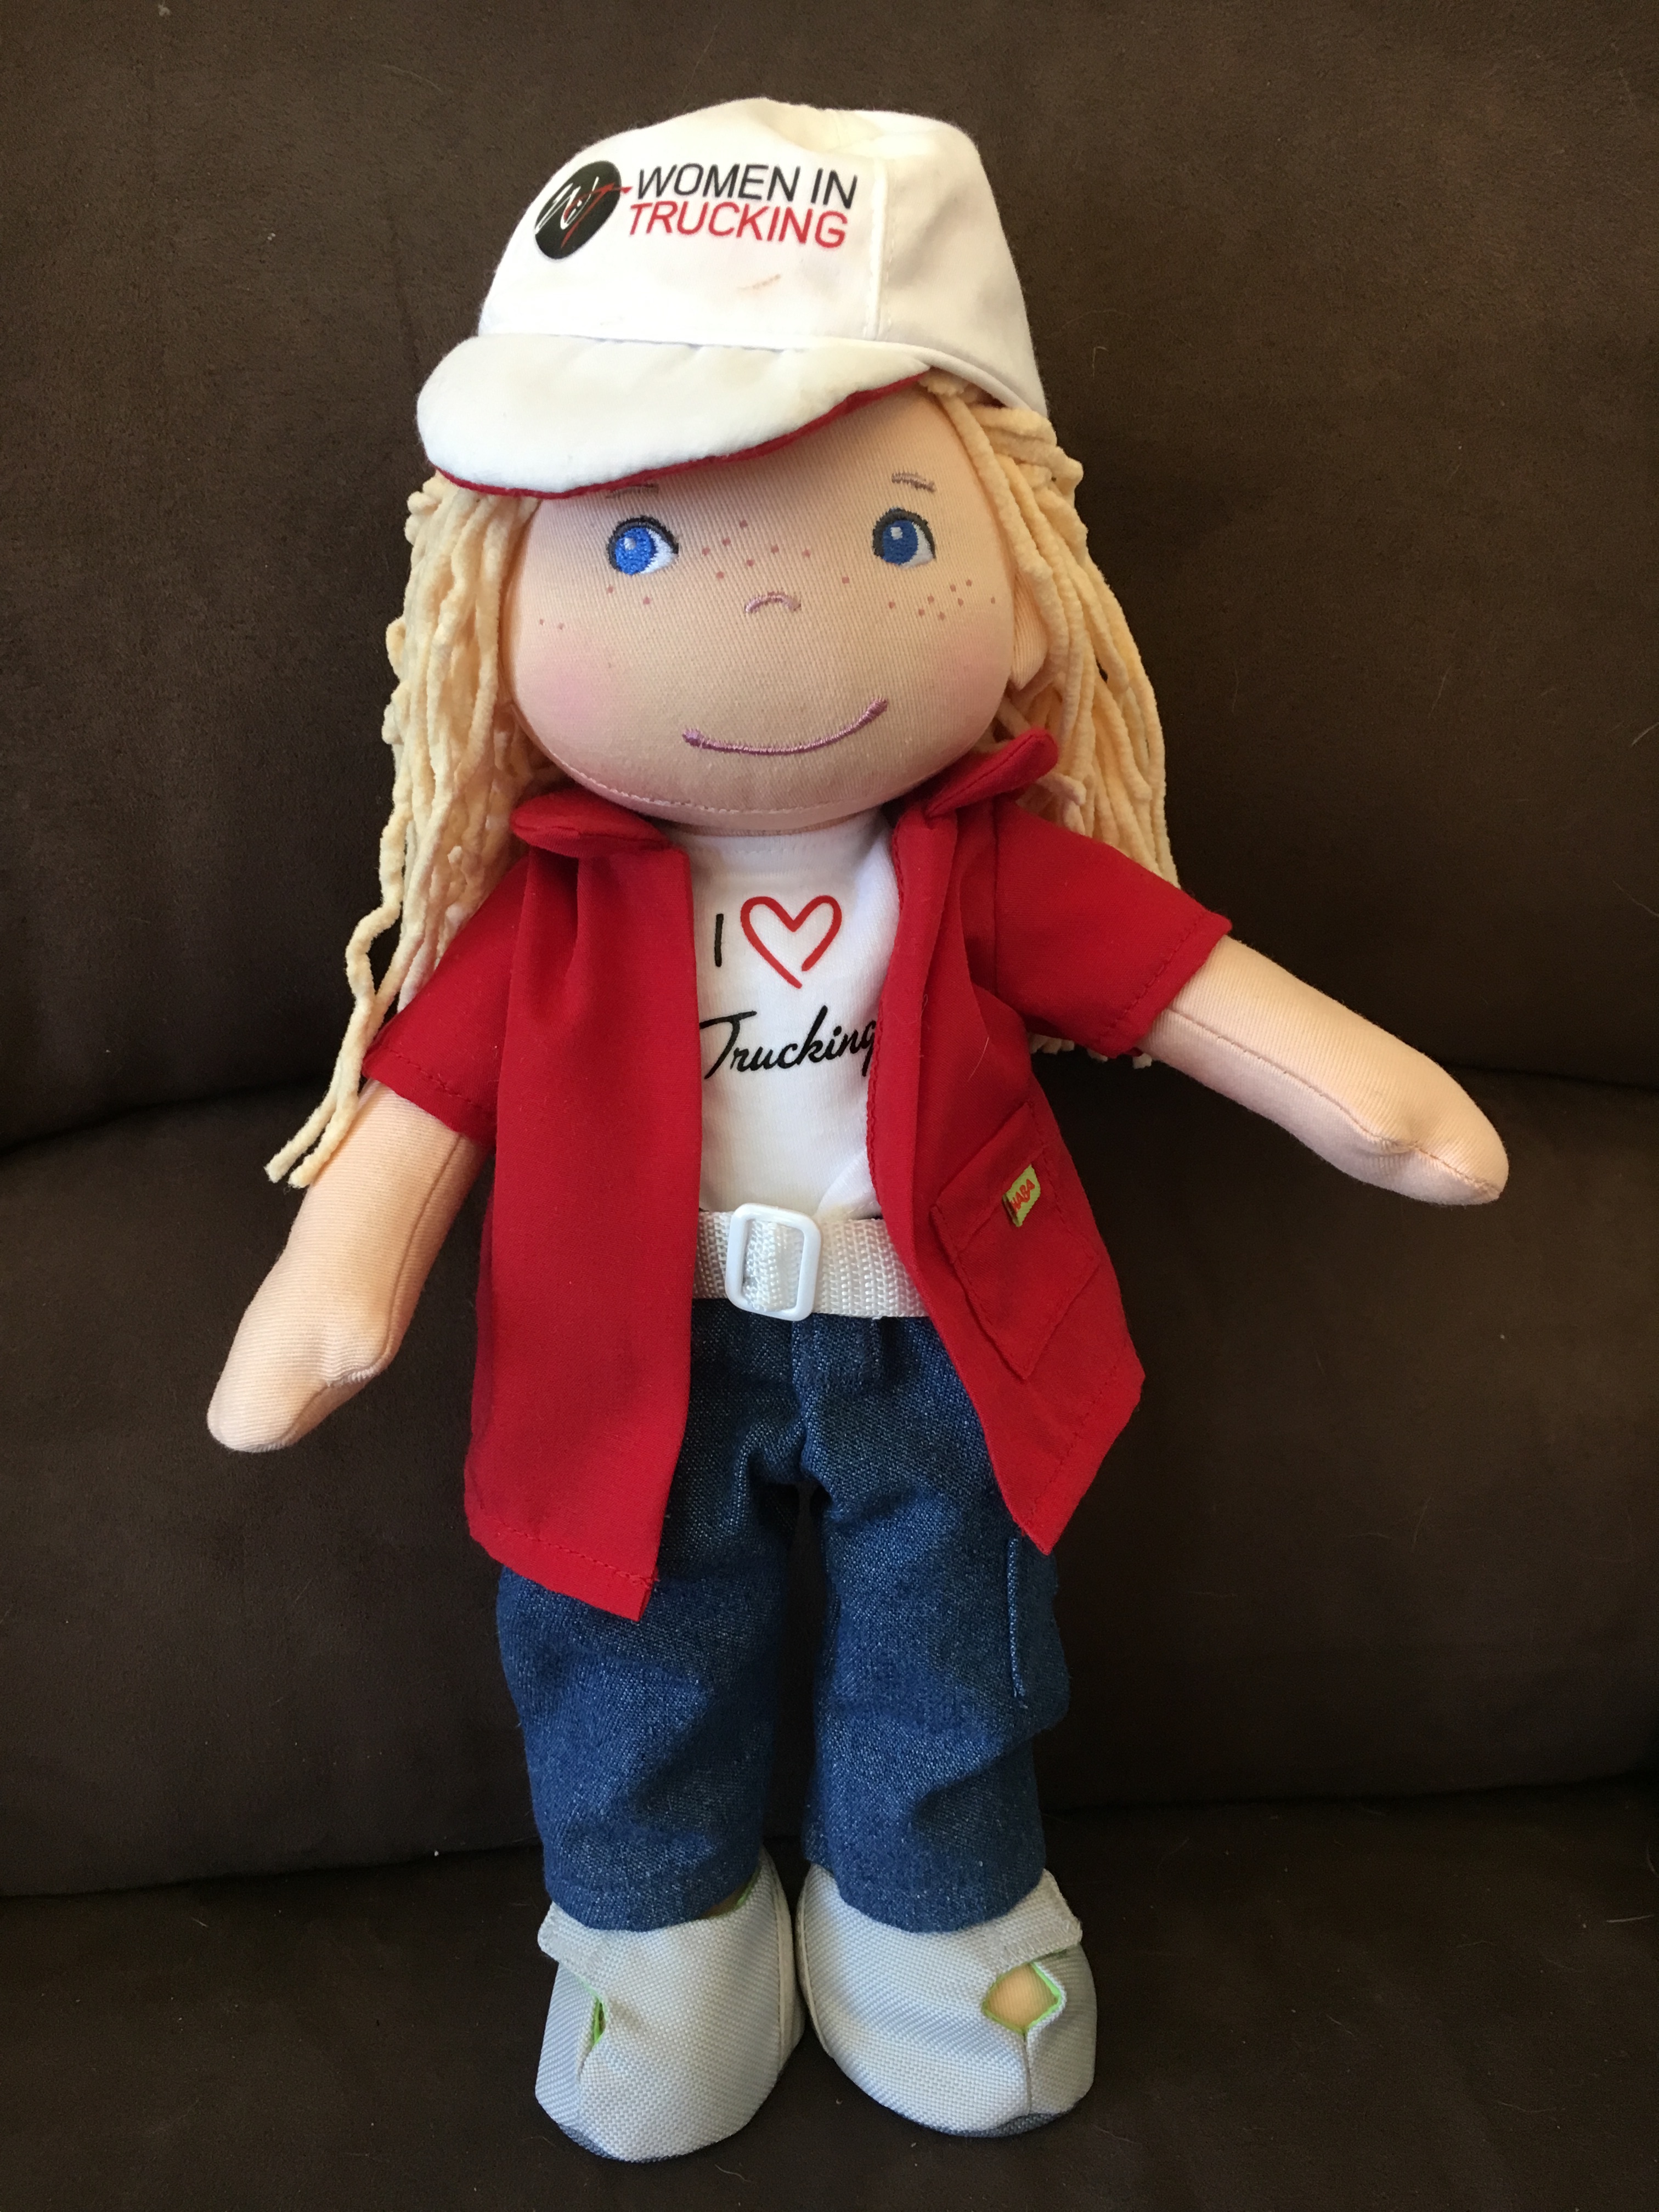 Brand New Doll Encourages Girls to Drive Their Own Dreams